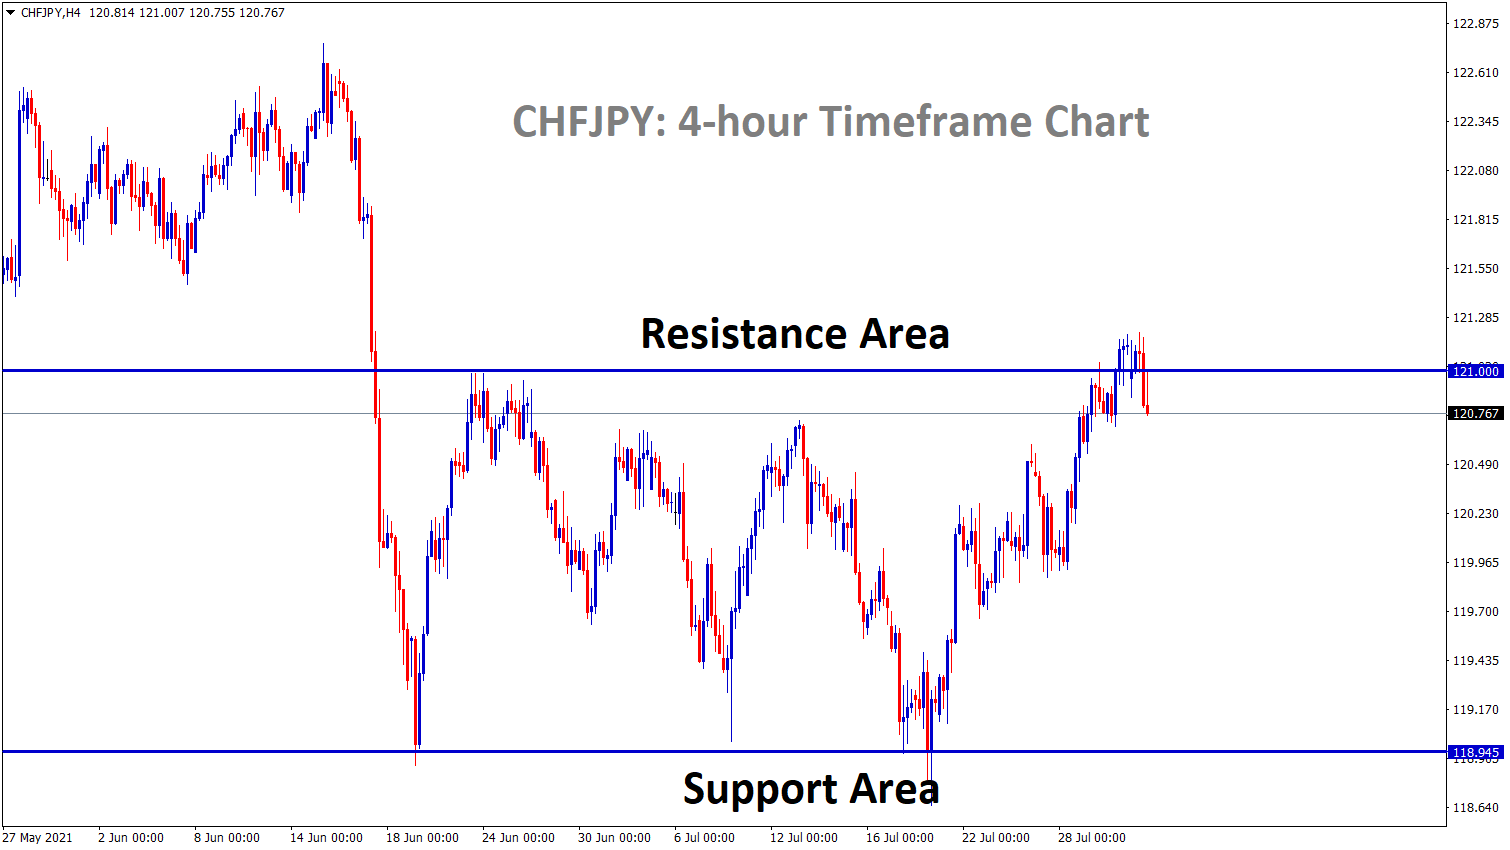 CHFJPY is standing now at the resistance area it is ranging between SR levels for a long time